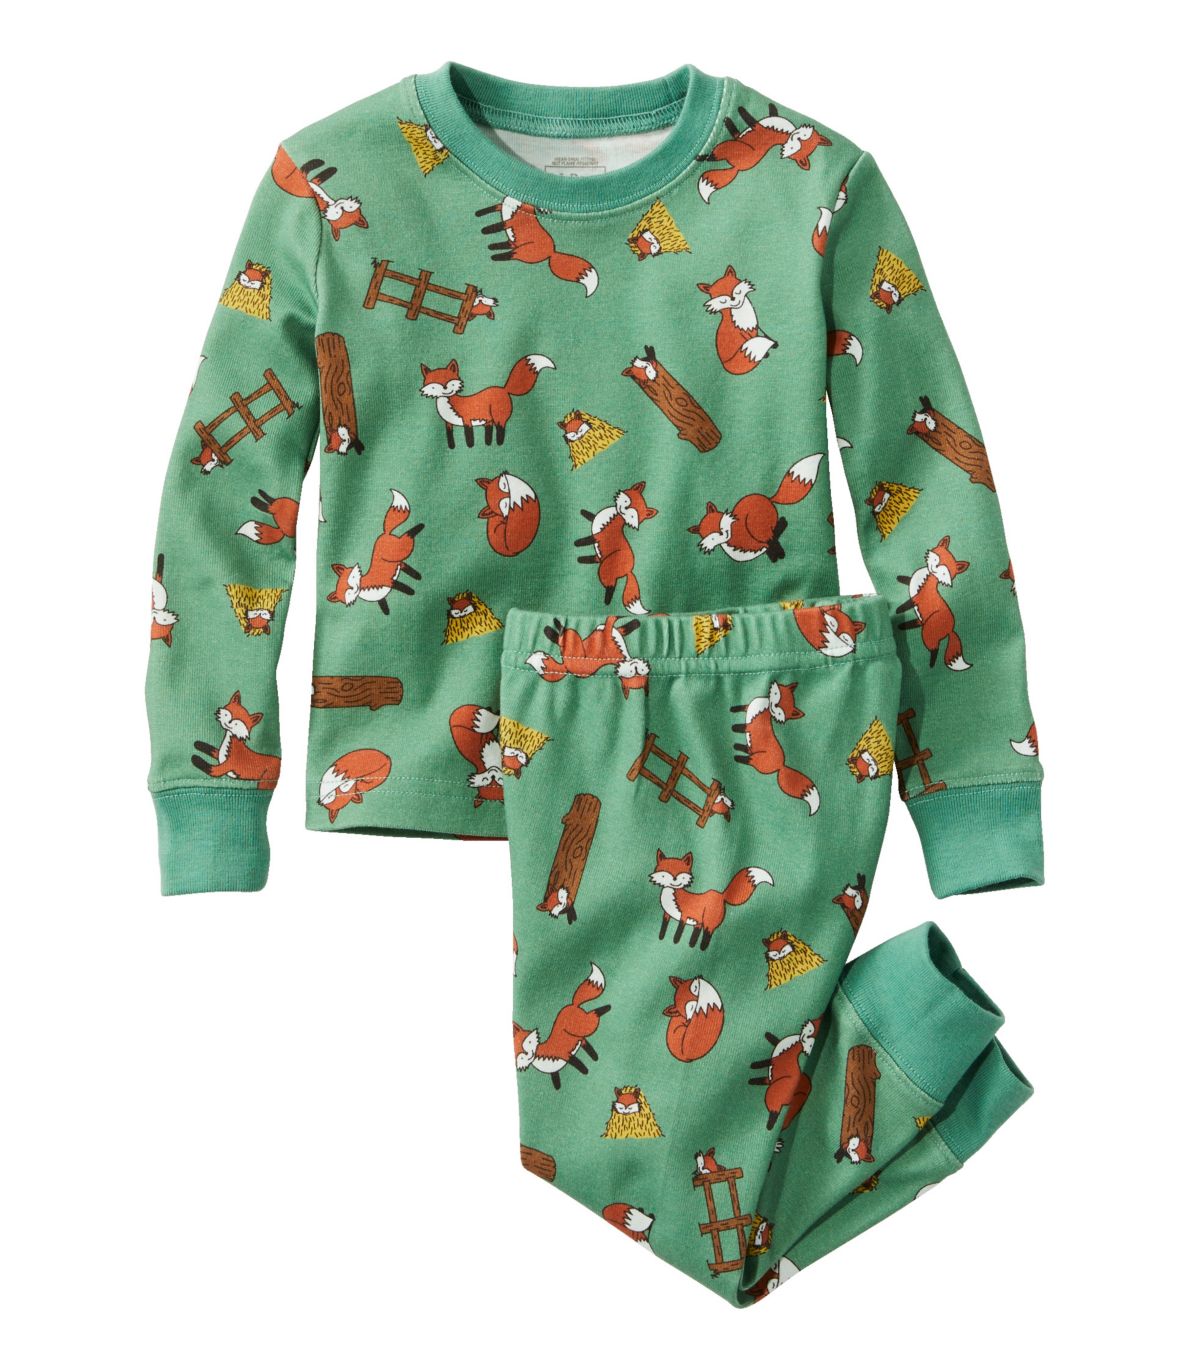 Toddlers' Organic Cotton Fitted Pajamas